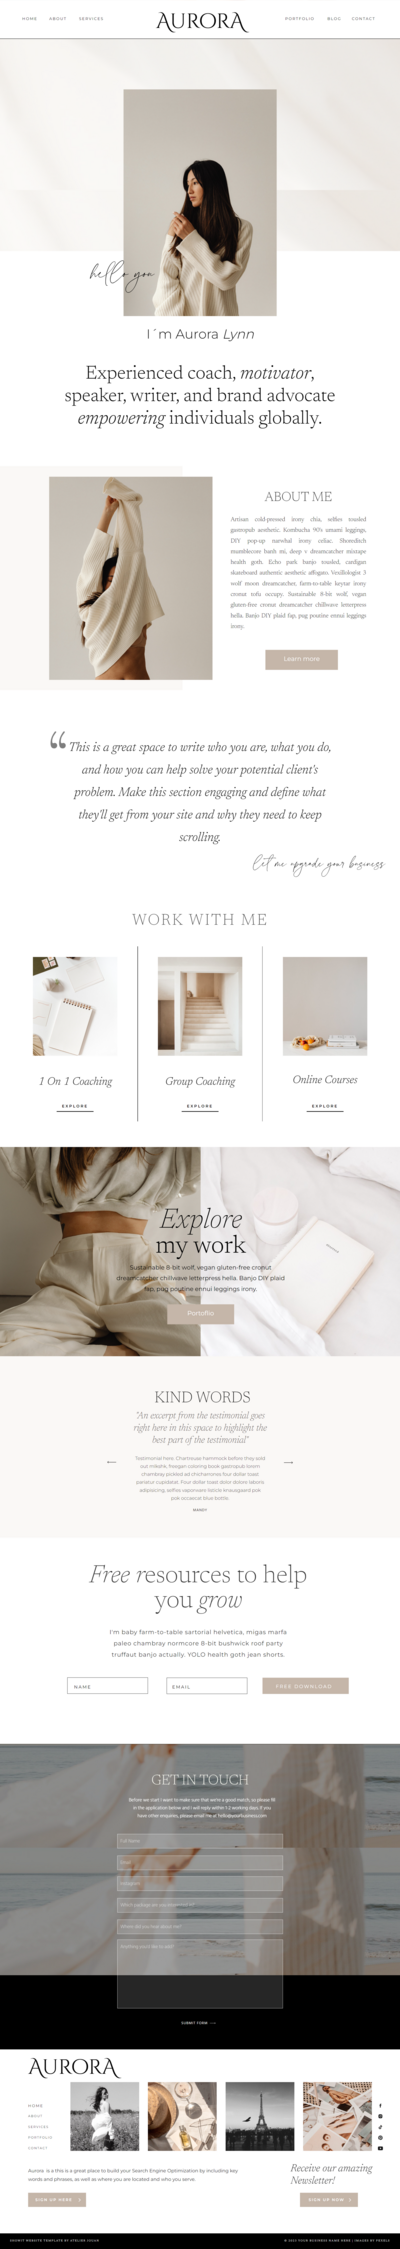 Aurora is a minimalist and elegant showit website template for service providers like coaches, photographers, and personal brands, including influencers and bloggers.